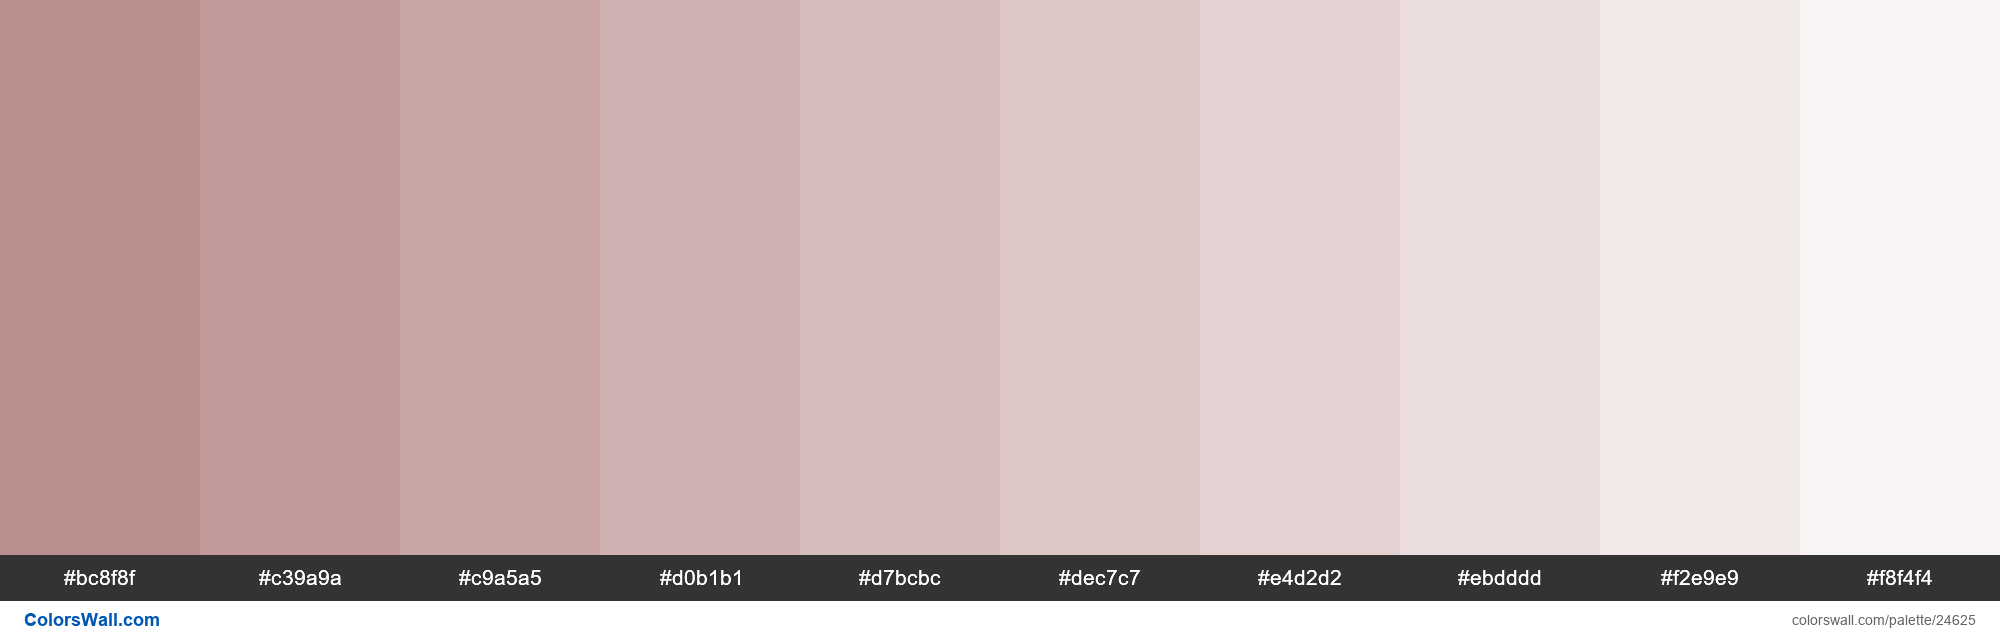 Tints of Rosy Brown #BC8F8F hex color - #24625